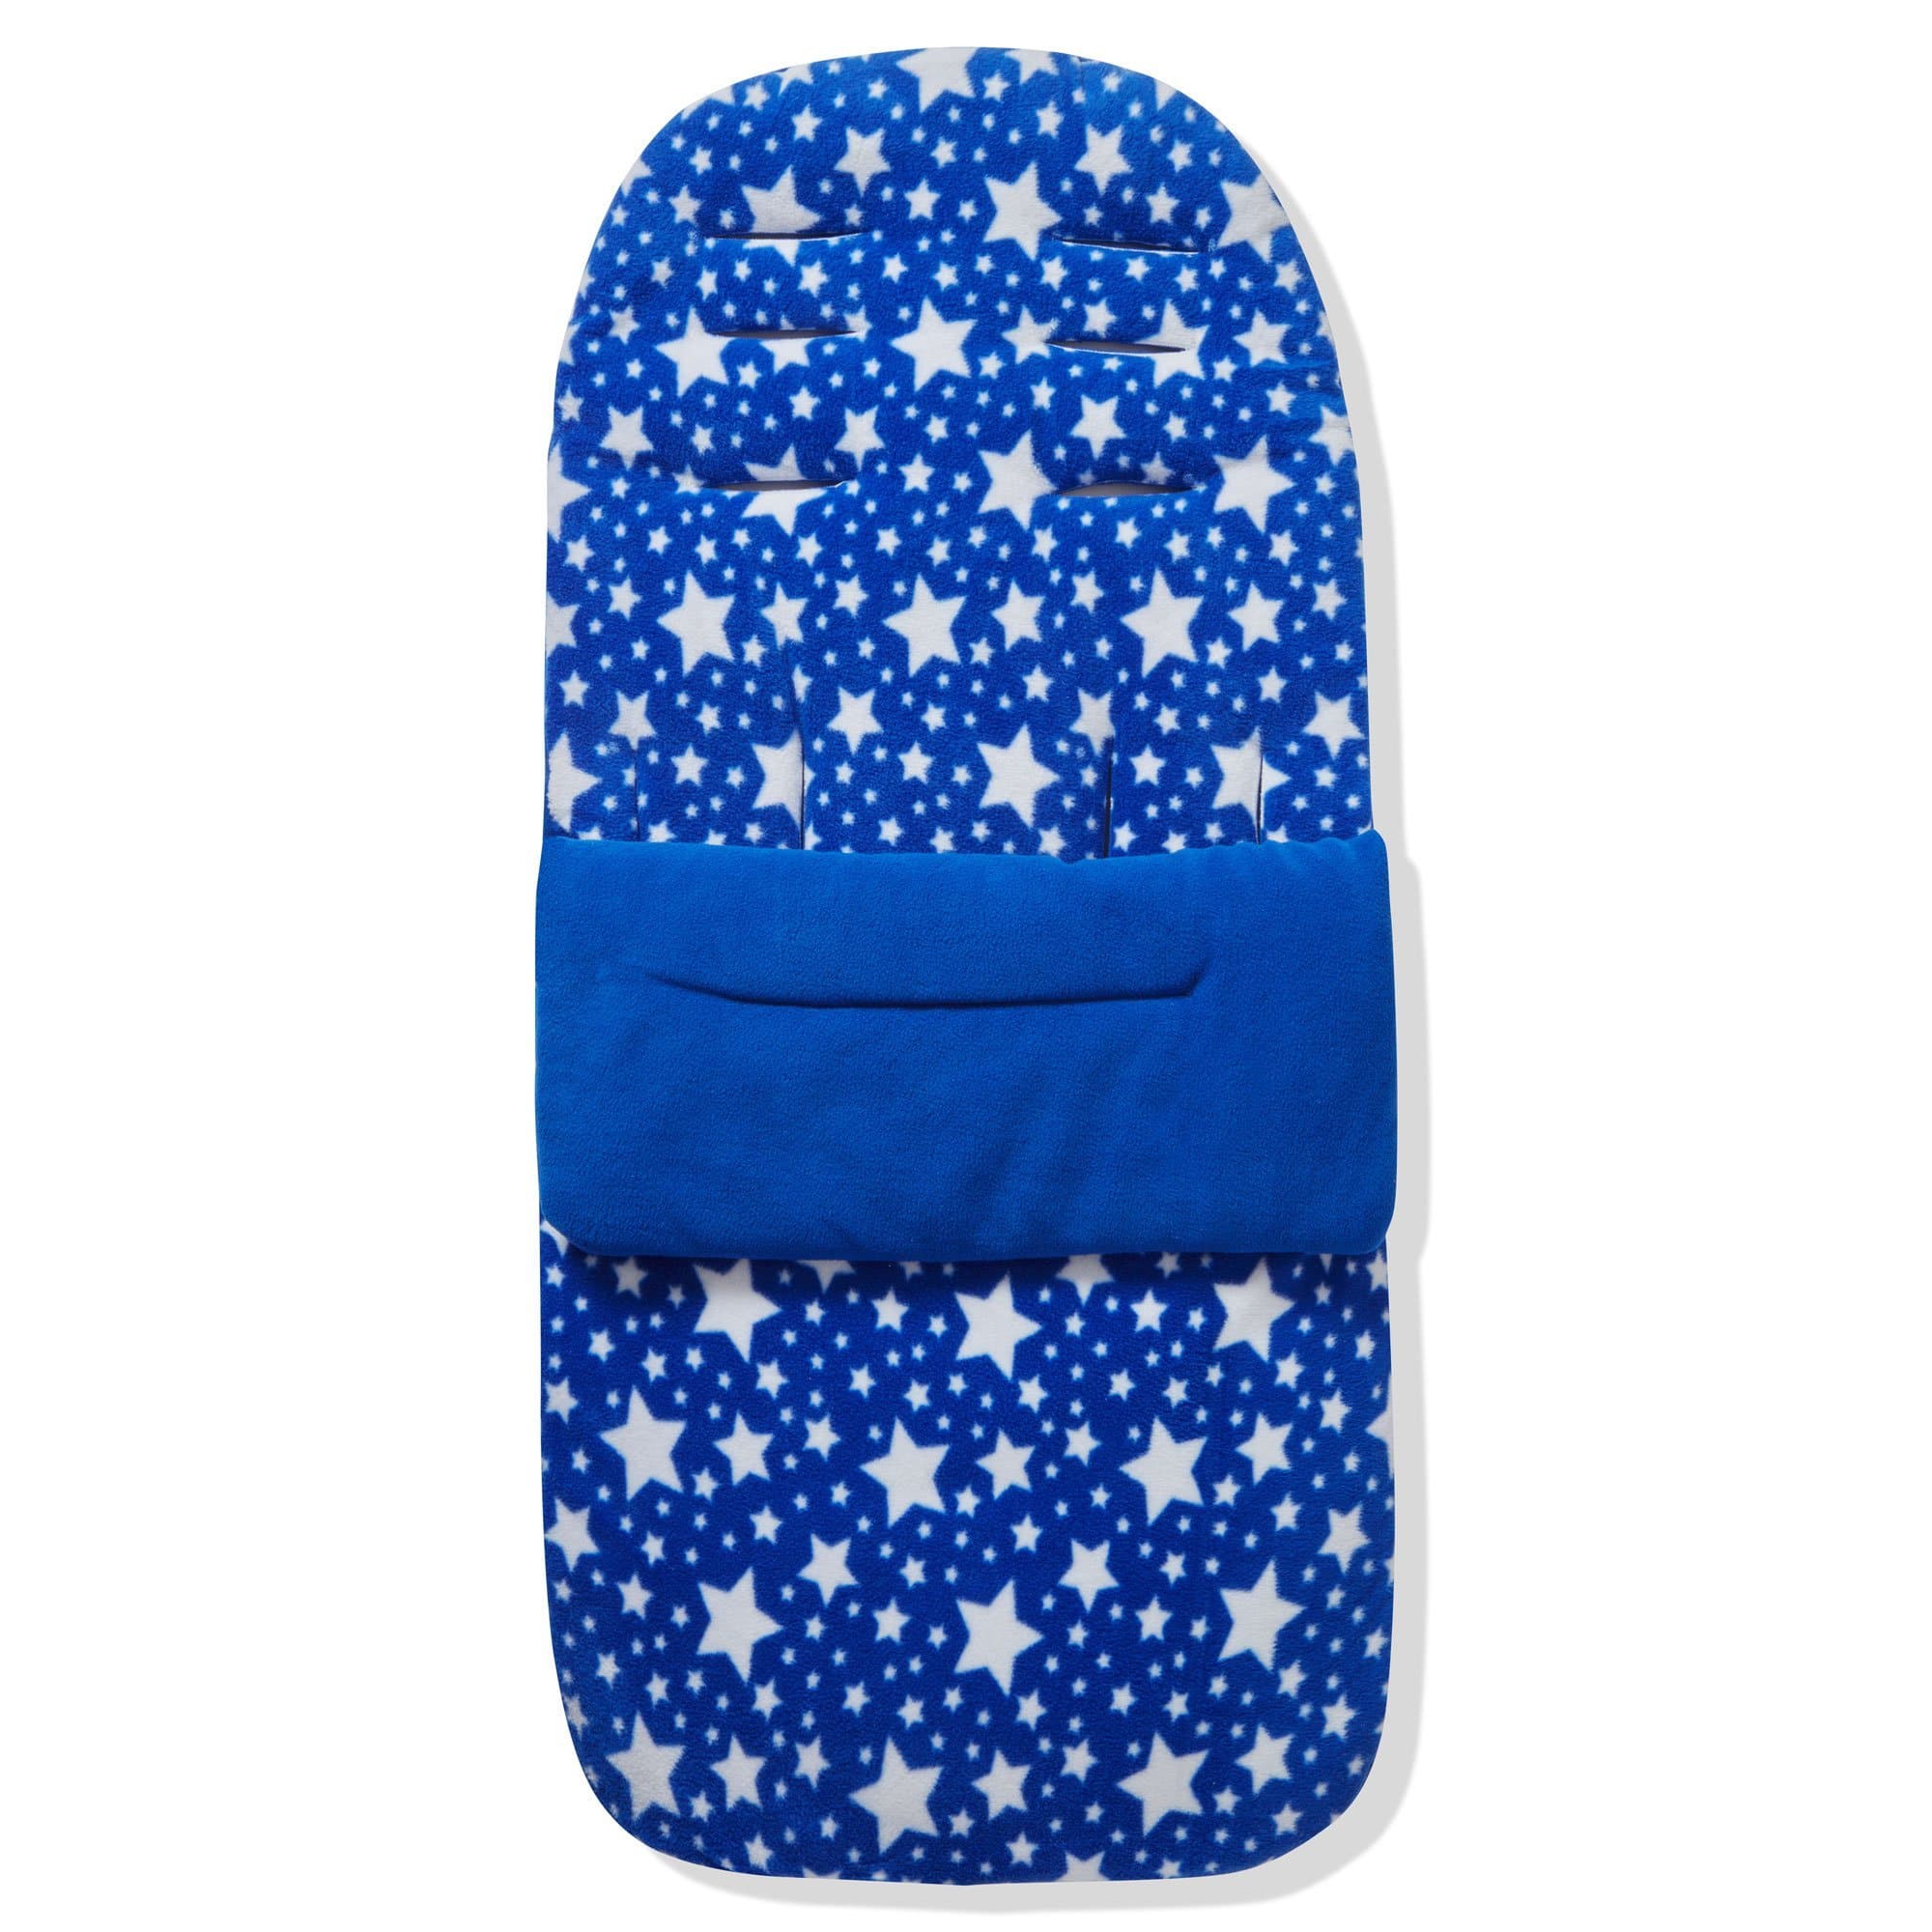 Fleece Footmuff / Cosy Toes Compatible with Hauck - Blue Star / Fits All Models | For Your Little One